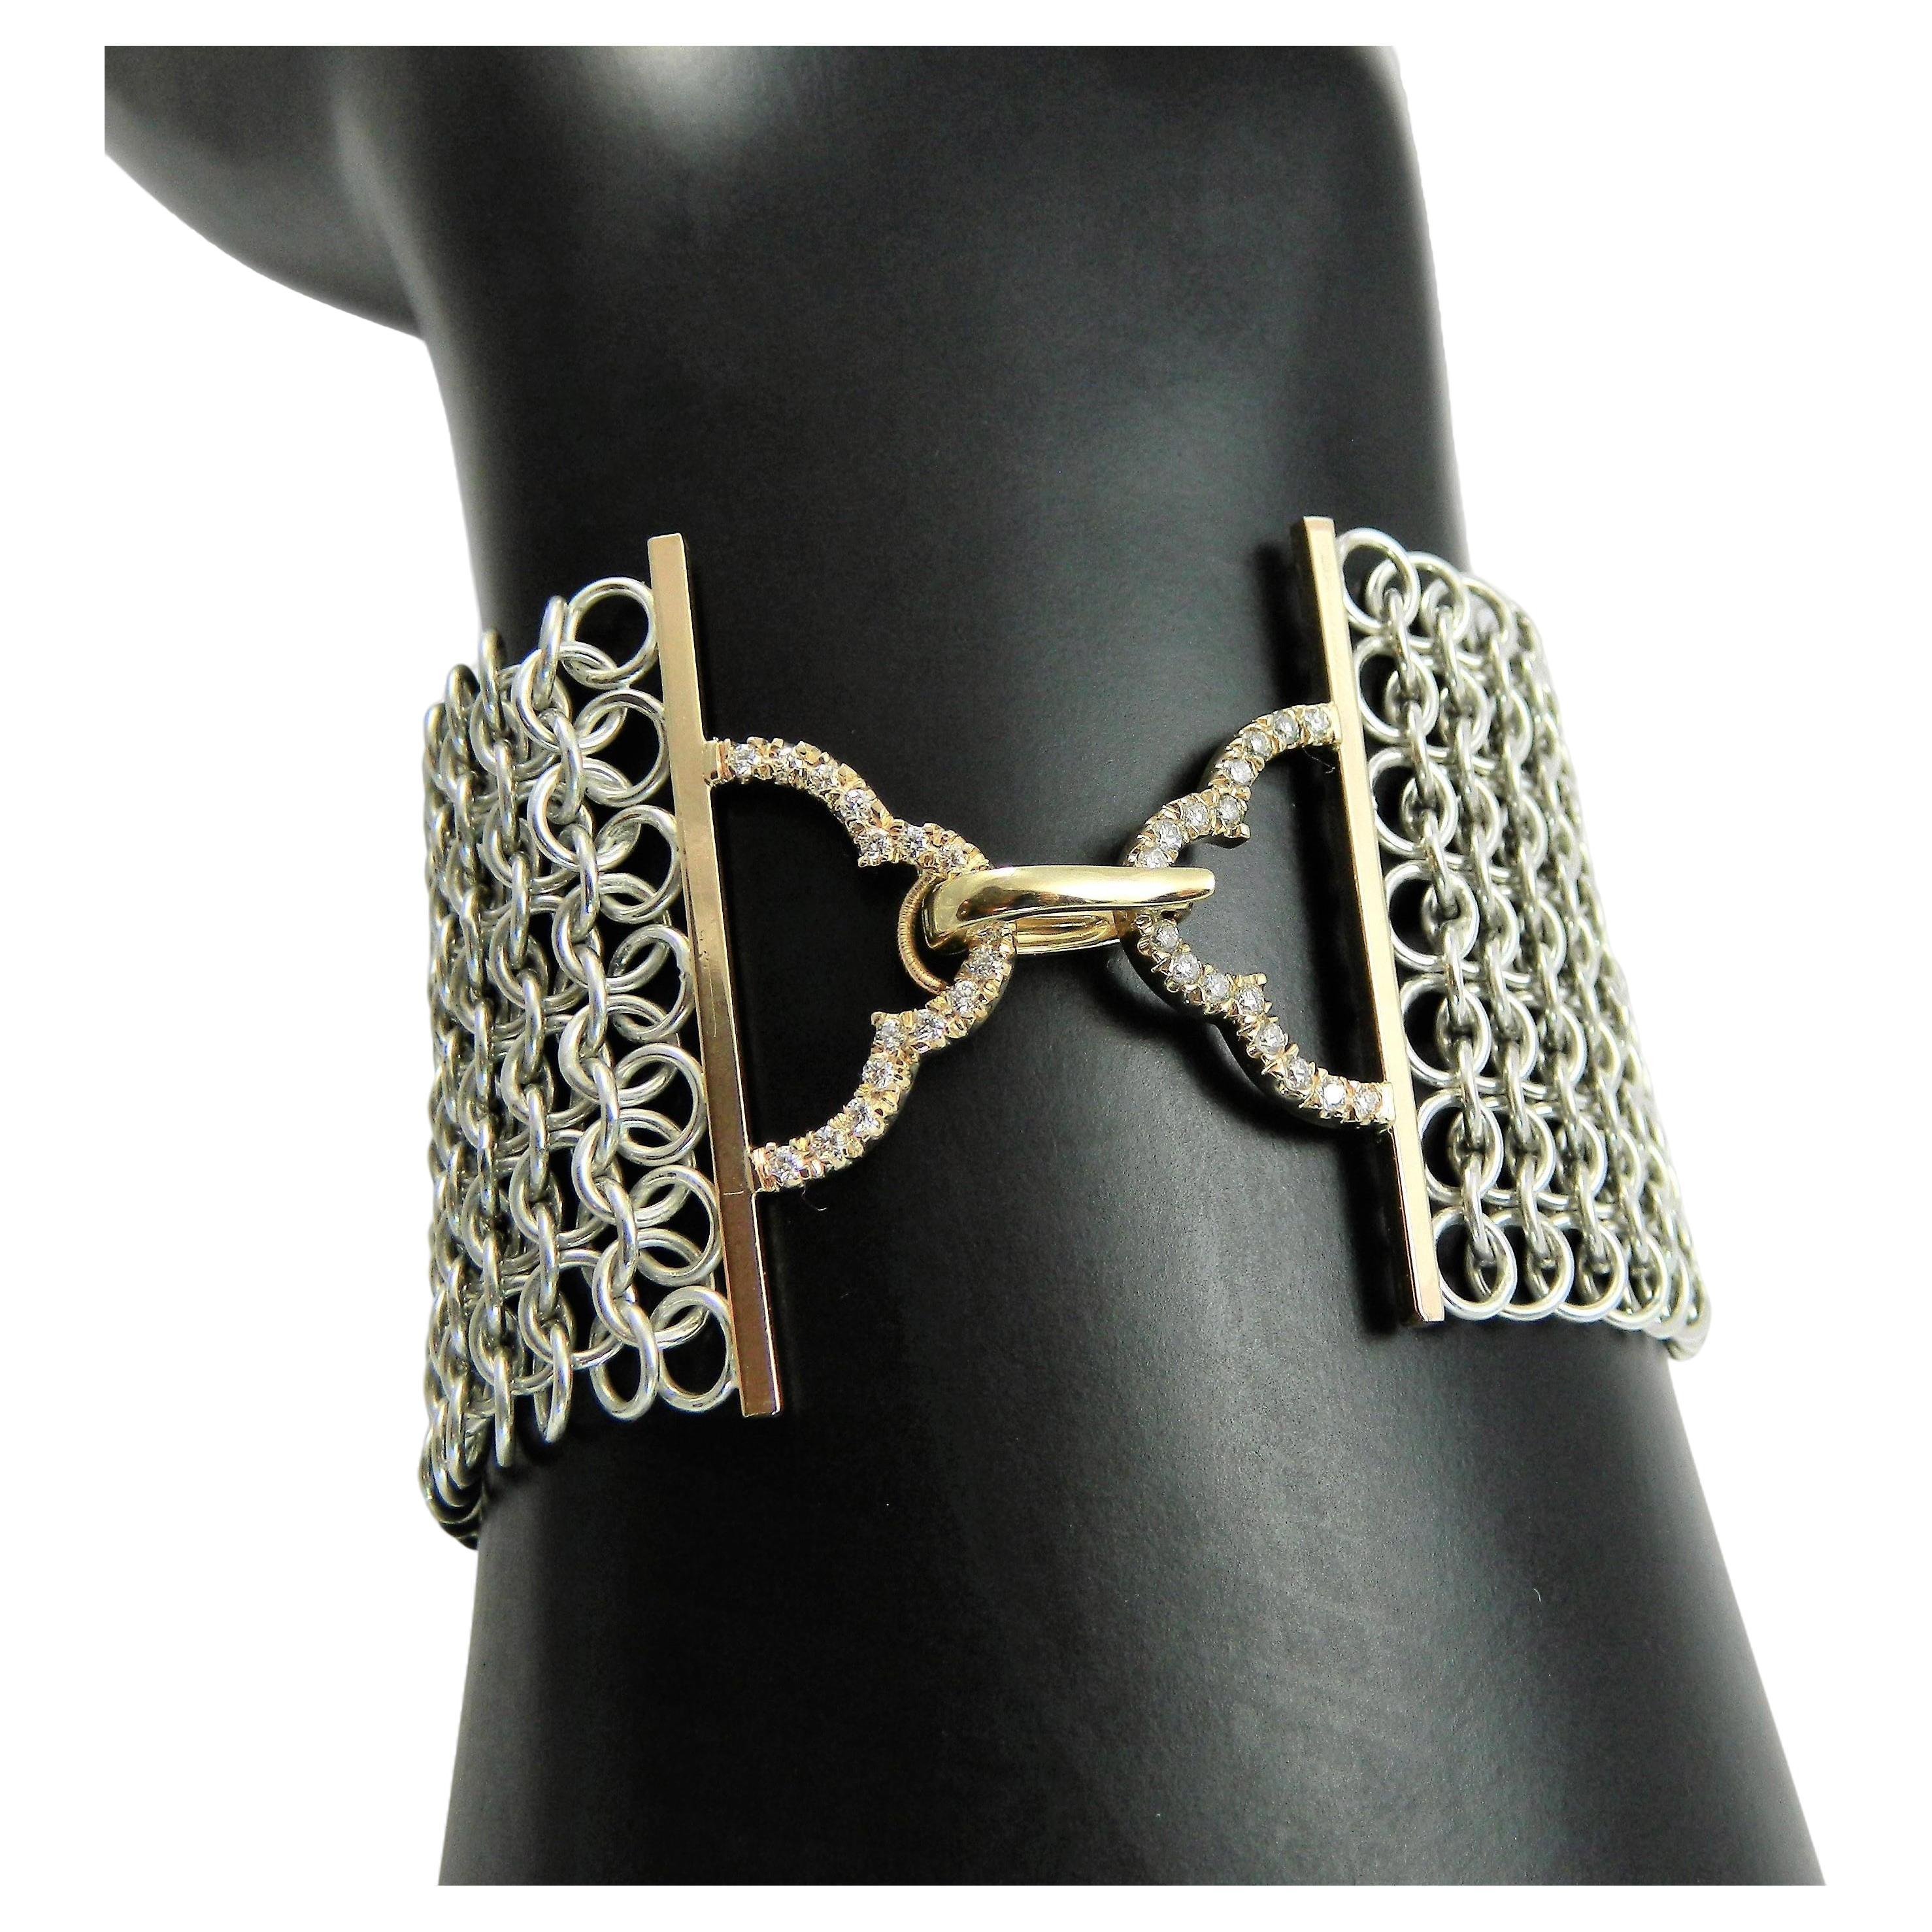 Deco Power Bracelet with Diamonds, Silver, 14K Gold and Japanese made Chainmail For Sale